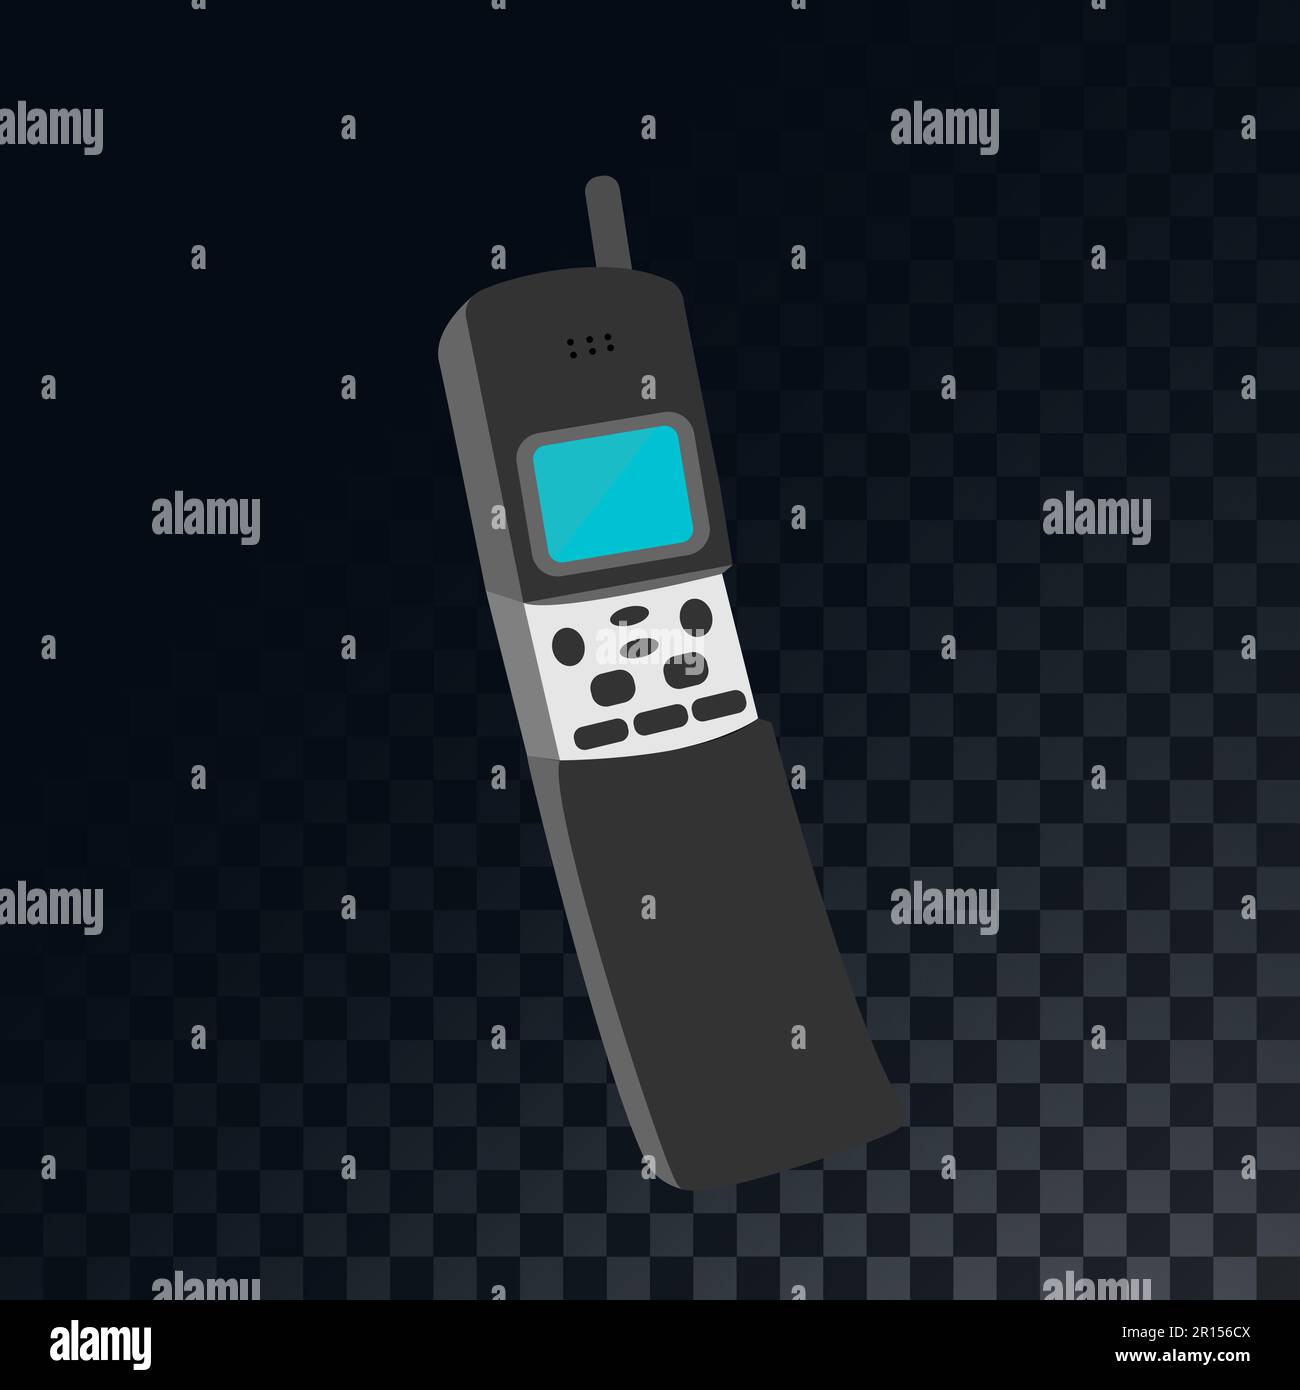 Old retro vintage mobile phone with antenna from the 70s, 80s, 90s on a translucent, dark, squared gray background of squares. Vector illustration. Stock Vector